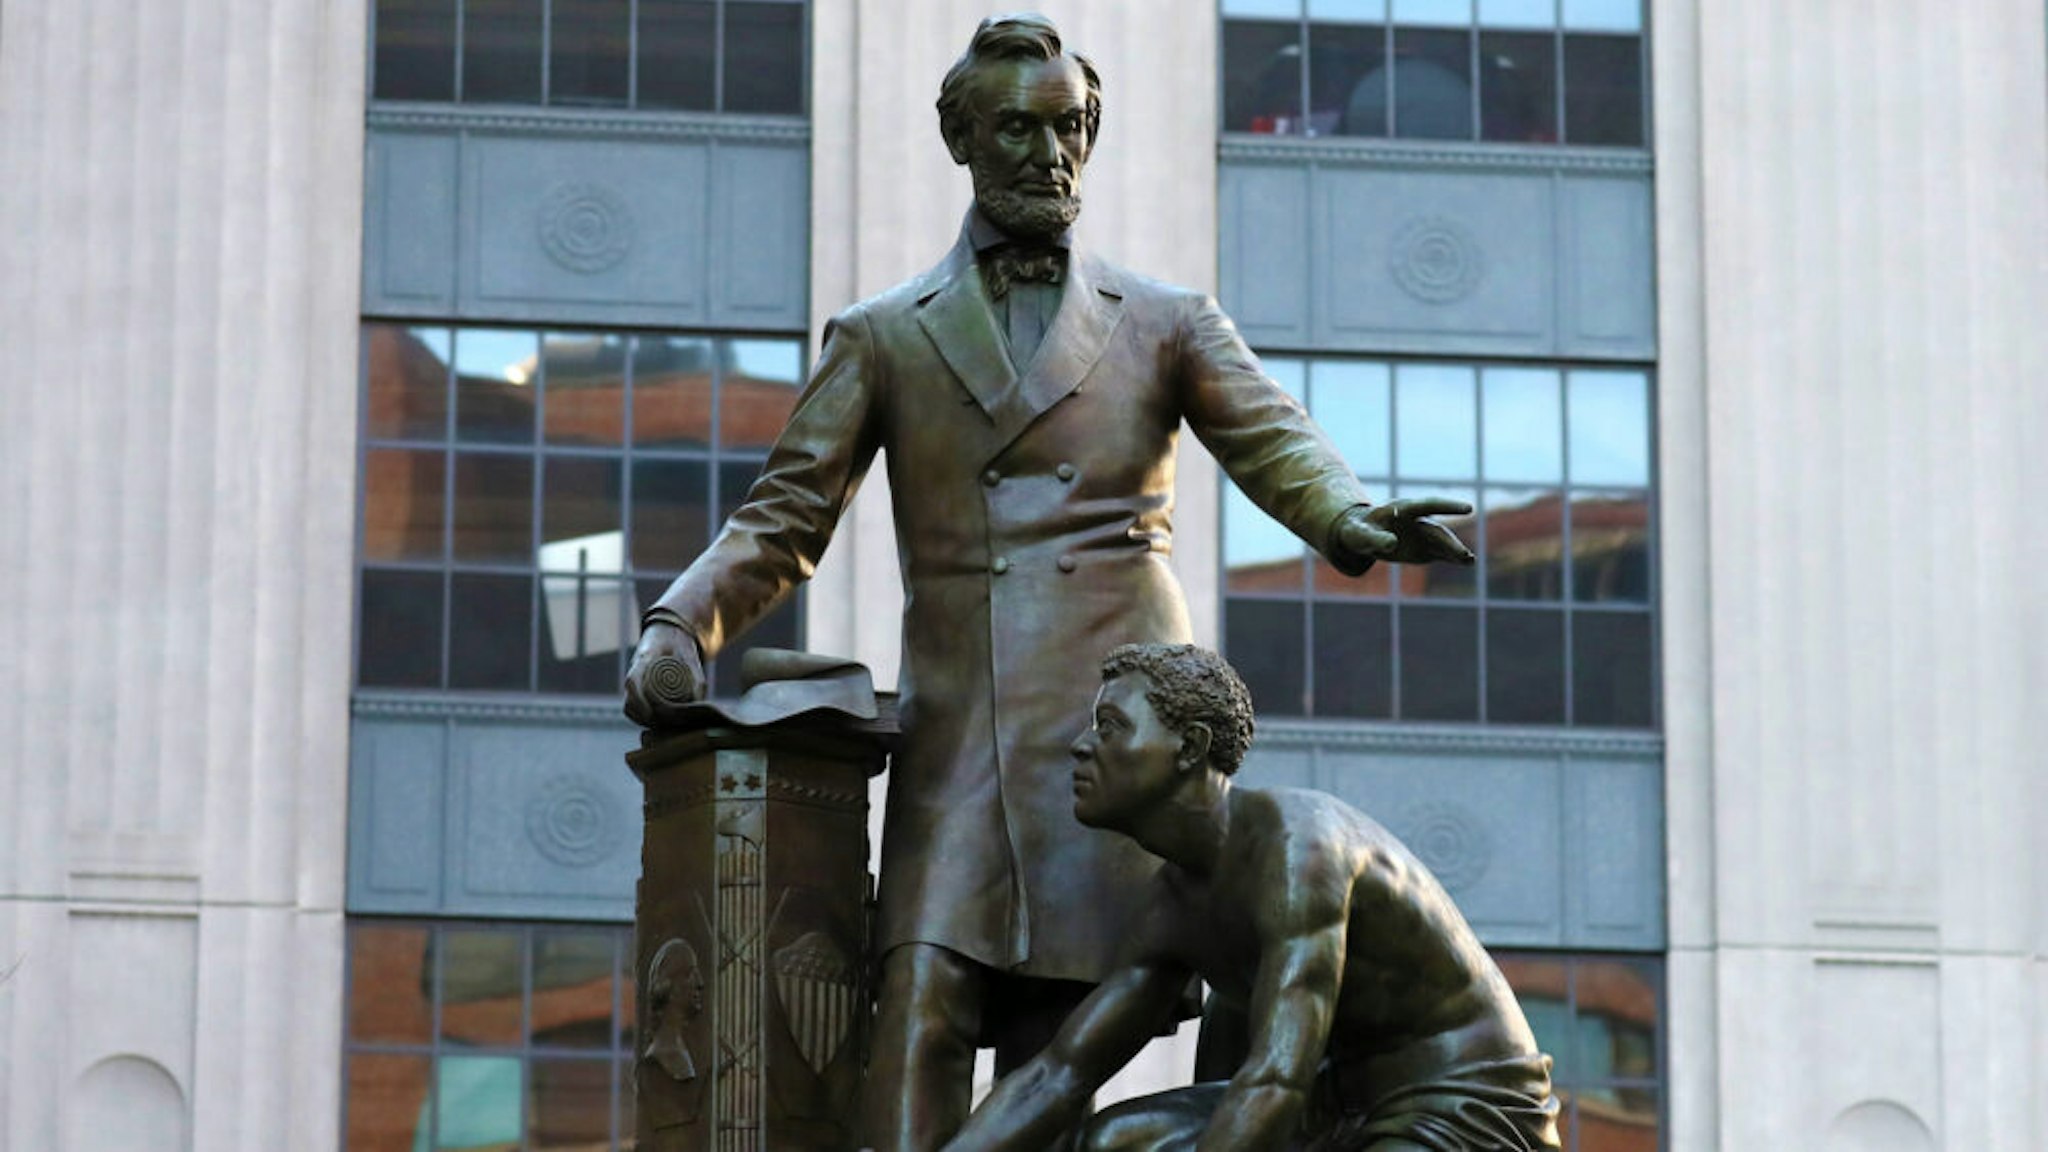 BOSTON, MA - JUNE 2: The Abraham Lincoln statue, 1879, by Thomas Ball in Park Square in Boston, is pictured on Jun. 2, 2017.